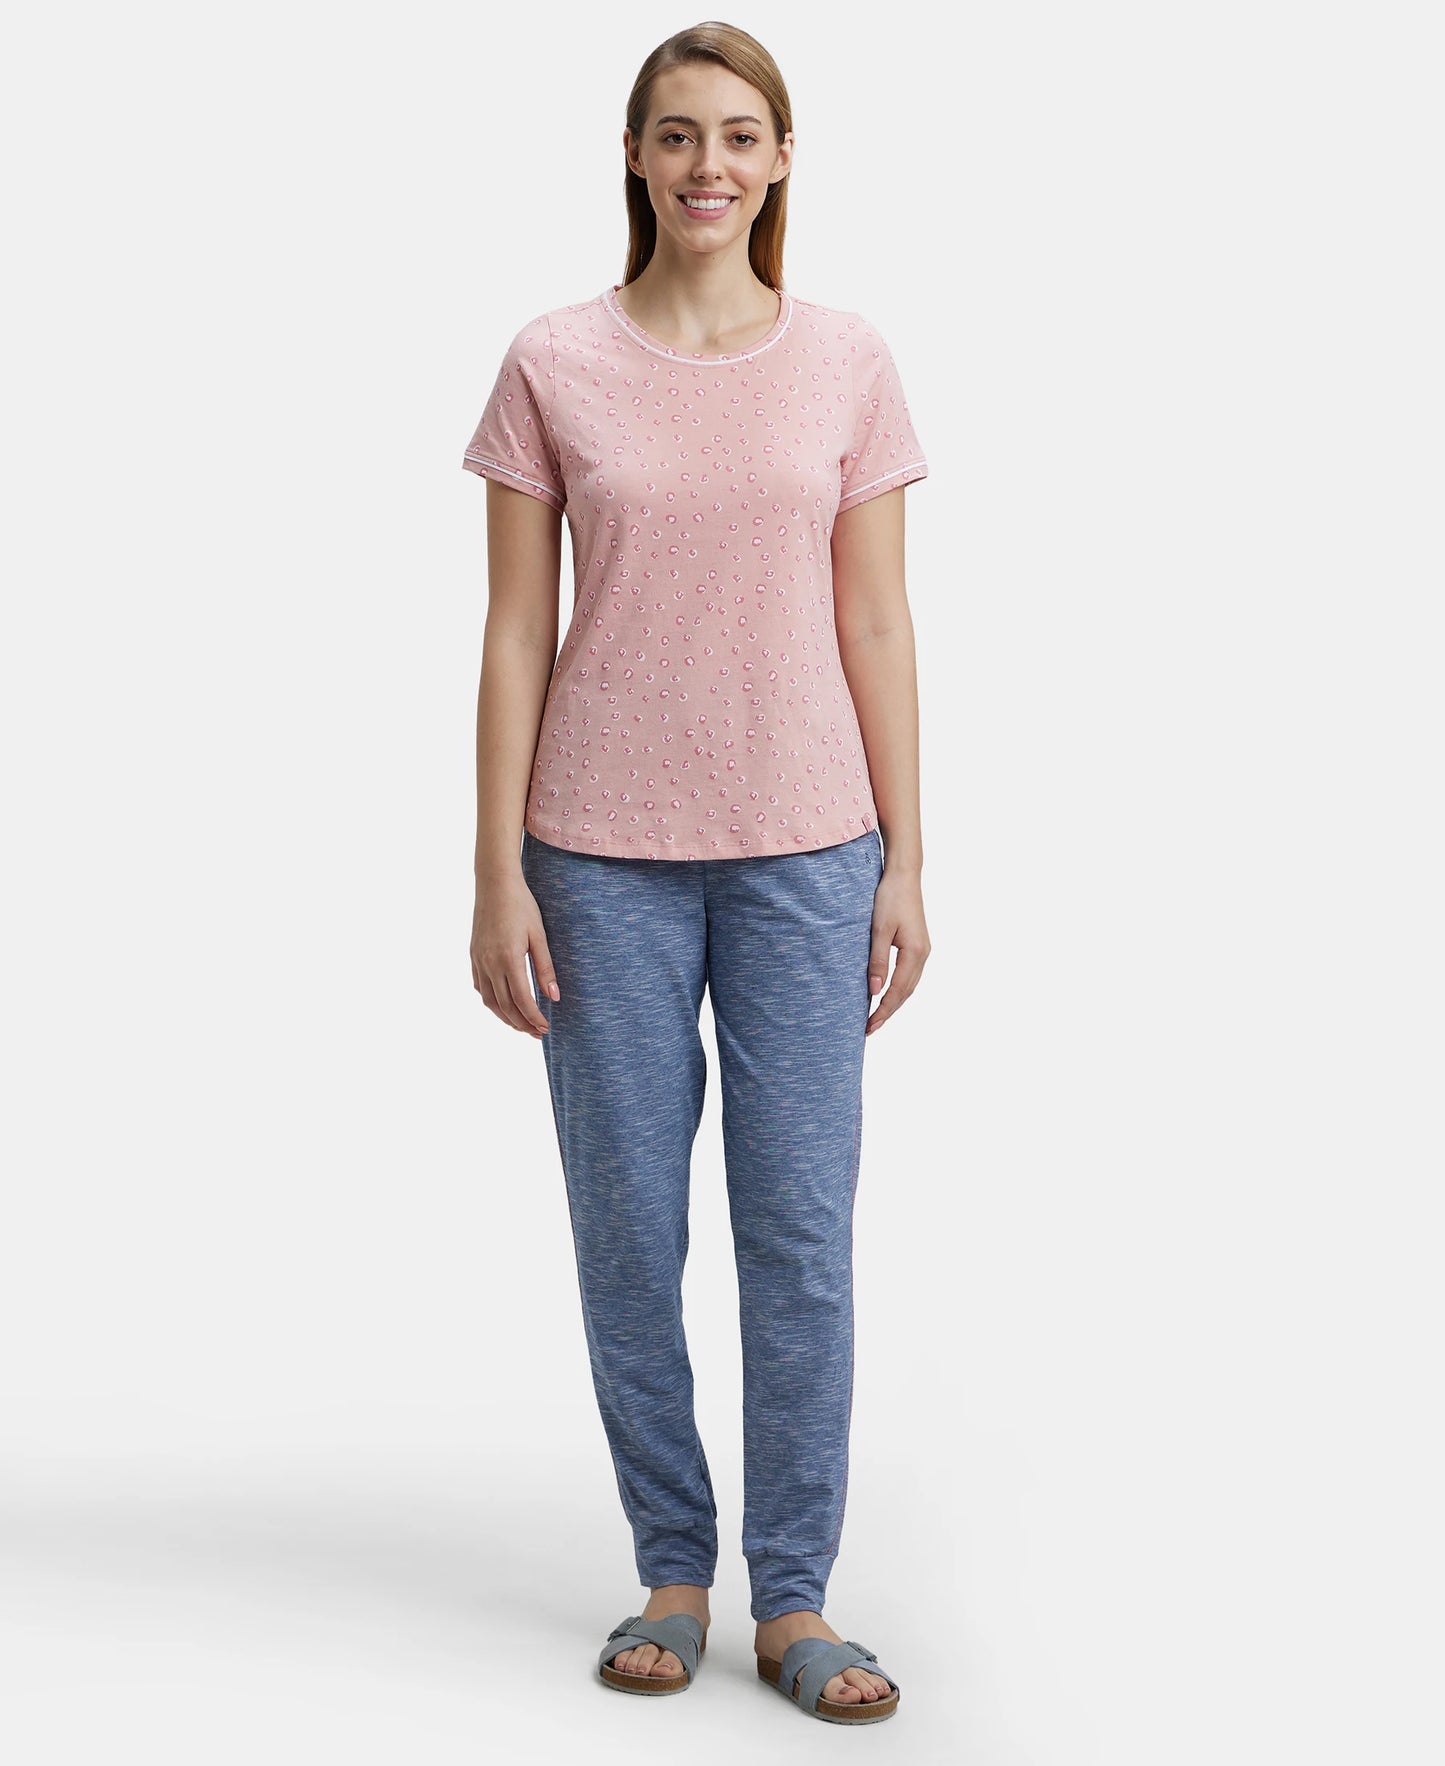 Super Combed Cotton Relaxed Fit Printed Round Neck Half Sleeve T-Shirt with Contrast Piping Design - Blush-4